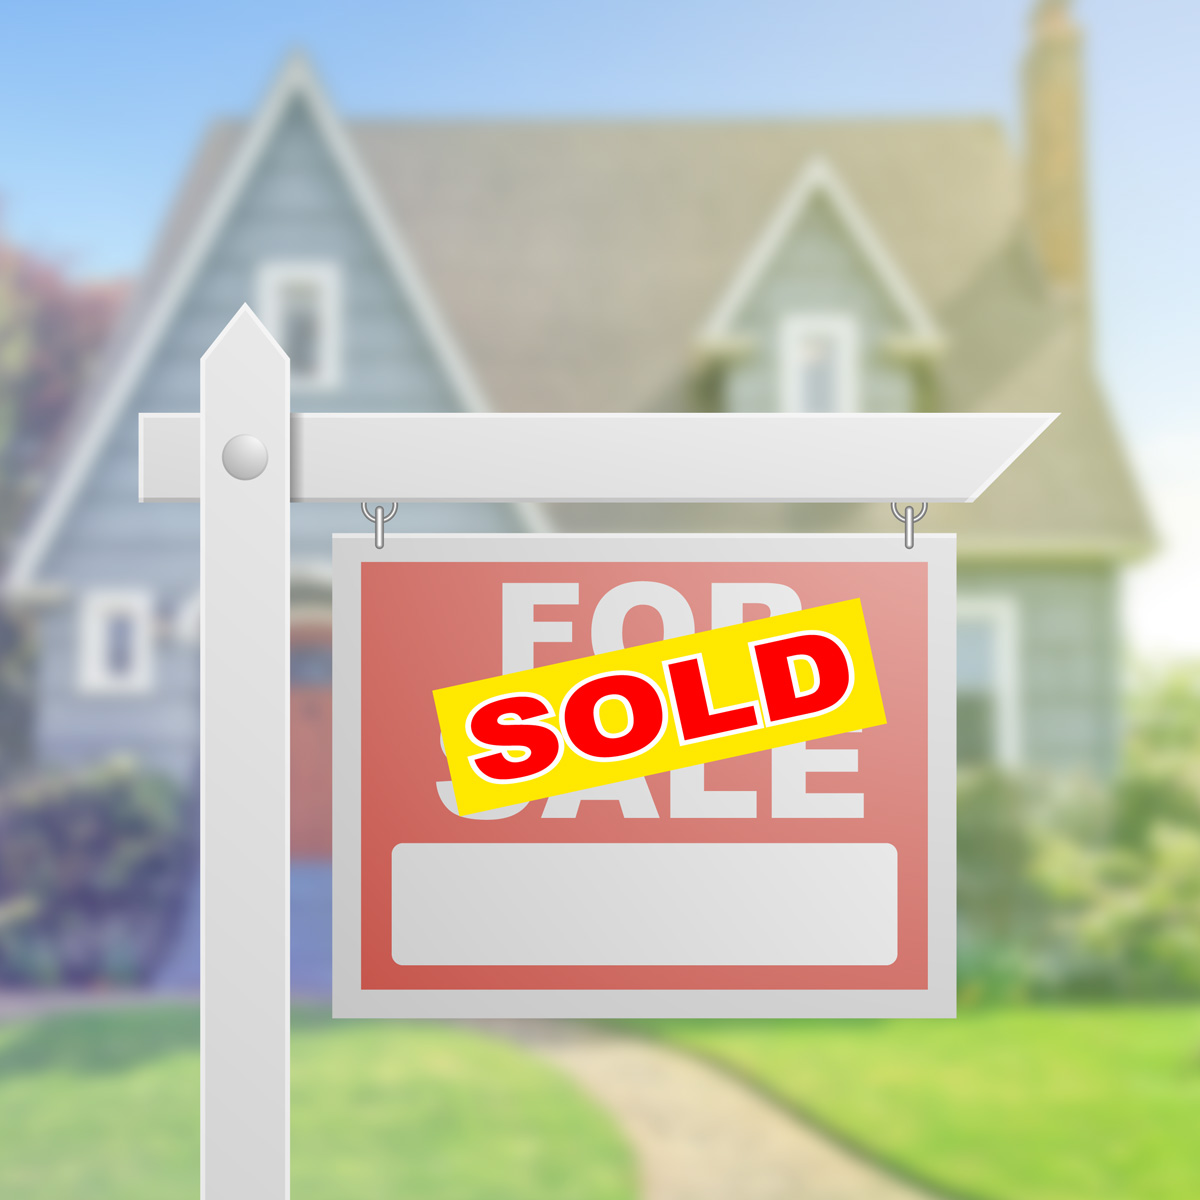 Ready to make the leap from renter to homeowner? Purchase season is here! Let's find your dream home and turn that 'For Sale' sign into a 'Sold' one. Reach out today!